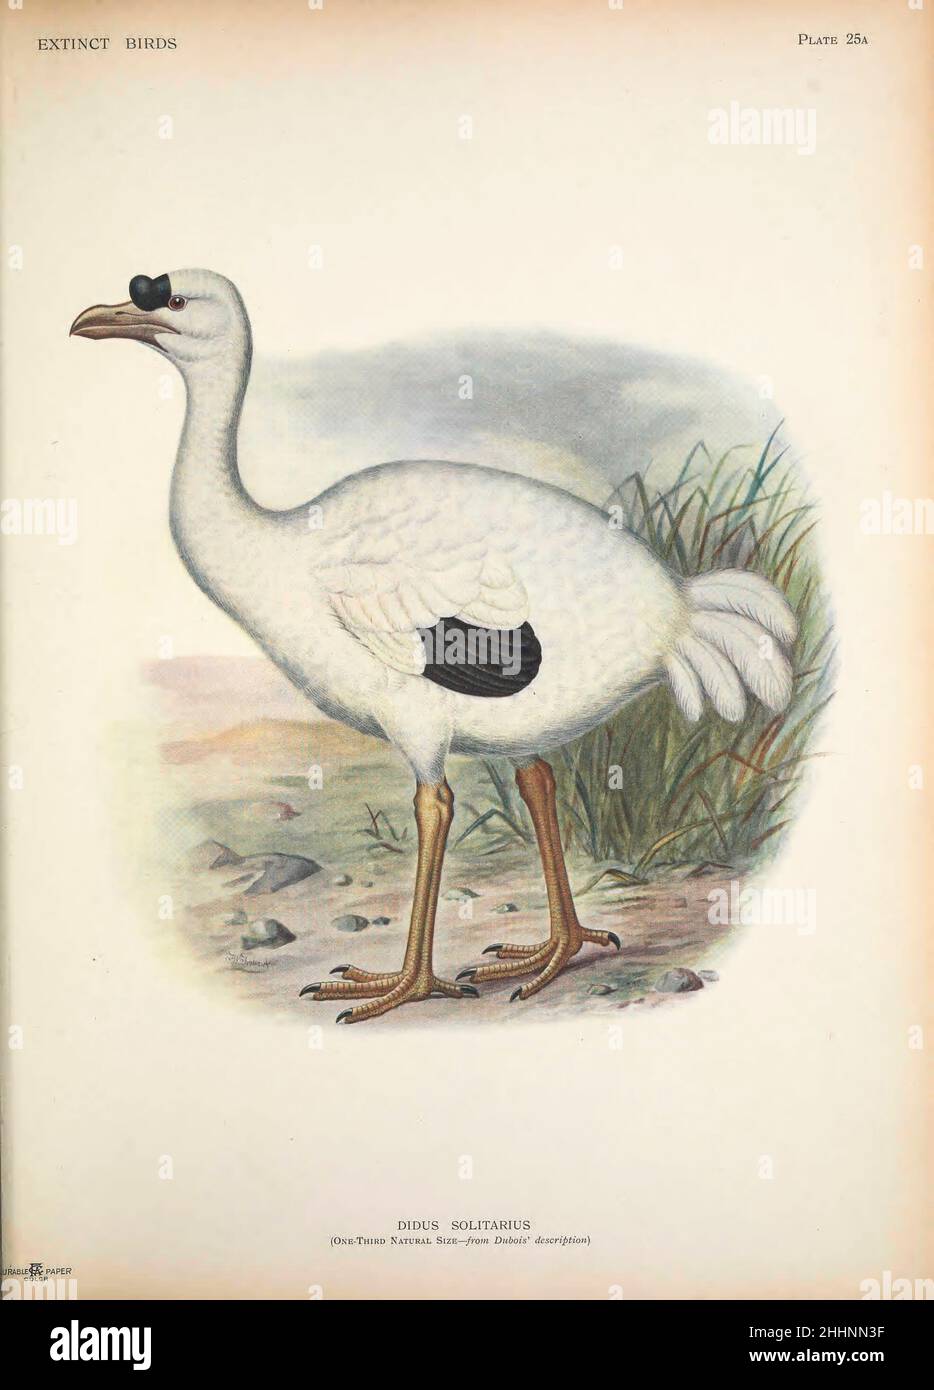 The Rodrigues solitaire (Pezophaps solitaria here as Didus solitarius) is an extinct flightless bird that was endemic to the island of Rodrigues, east of Madagascar in the Indian Ocean. Genetically within the family of pigeons and doves, it was most closely related to the also extinct dodo of the nearby island Mauritius, the two forming the subfamily Raphinae. The Nicobar pigeon is their closest living genetic relative. from ' Extinct birds ' : an attempt to unite in one volume a short account of those birds which have become extinct in historical times : that is, within the last six or seven Stock Photo